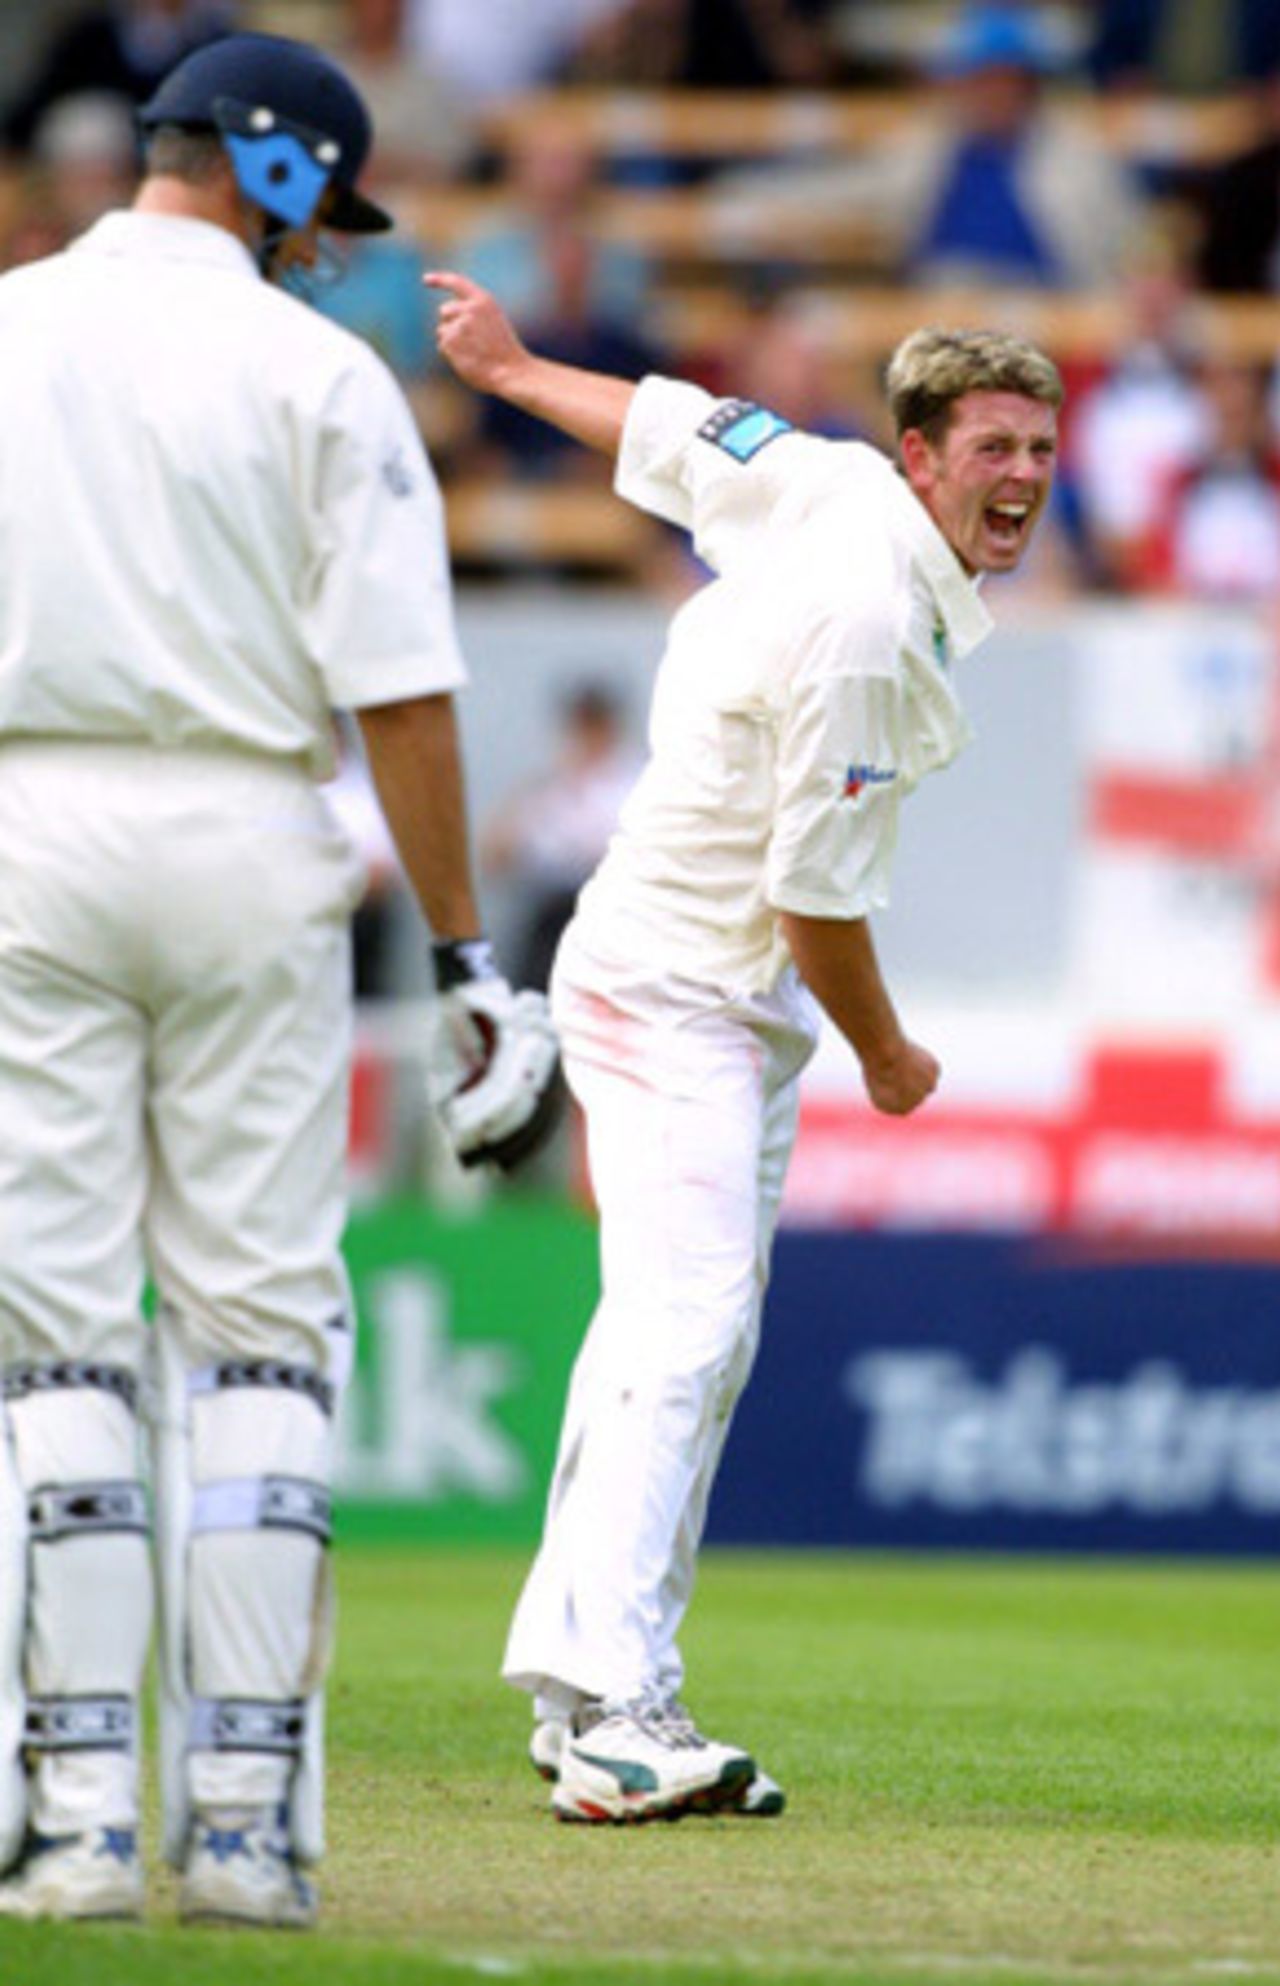 New Zealand bowler Ian Butler successfully appeals for lbw against England batsman Andy Caddick. Caddick was dismissed for 0. 1st Test: New Zealand v England at Jade Stadium, Christchurch, 13-17 March 2002 (13 March 2002).